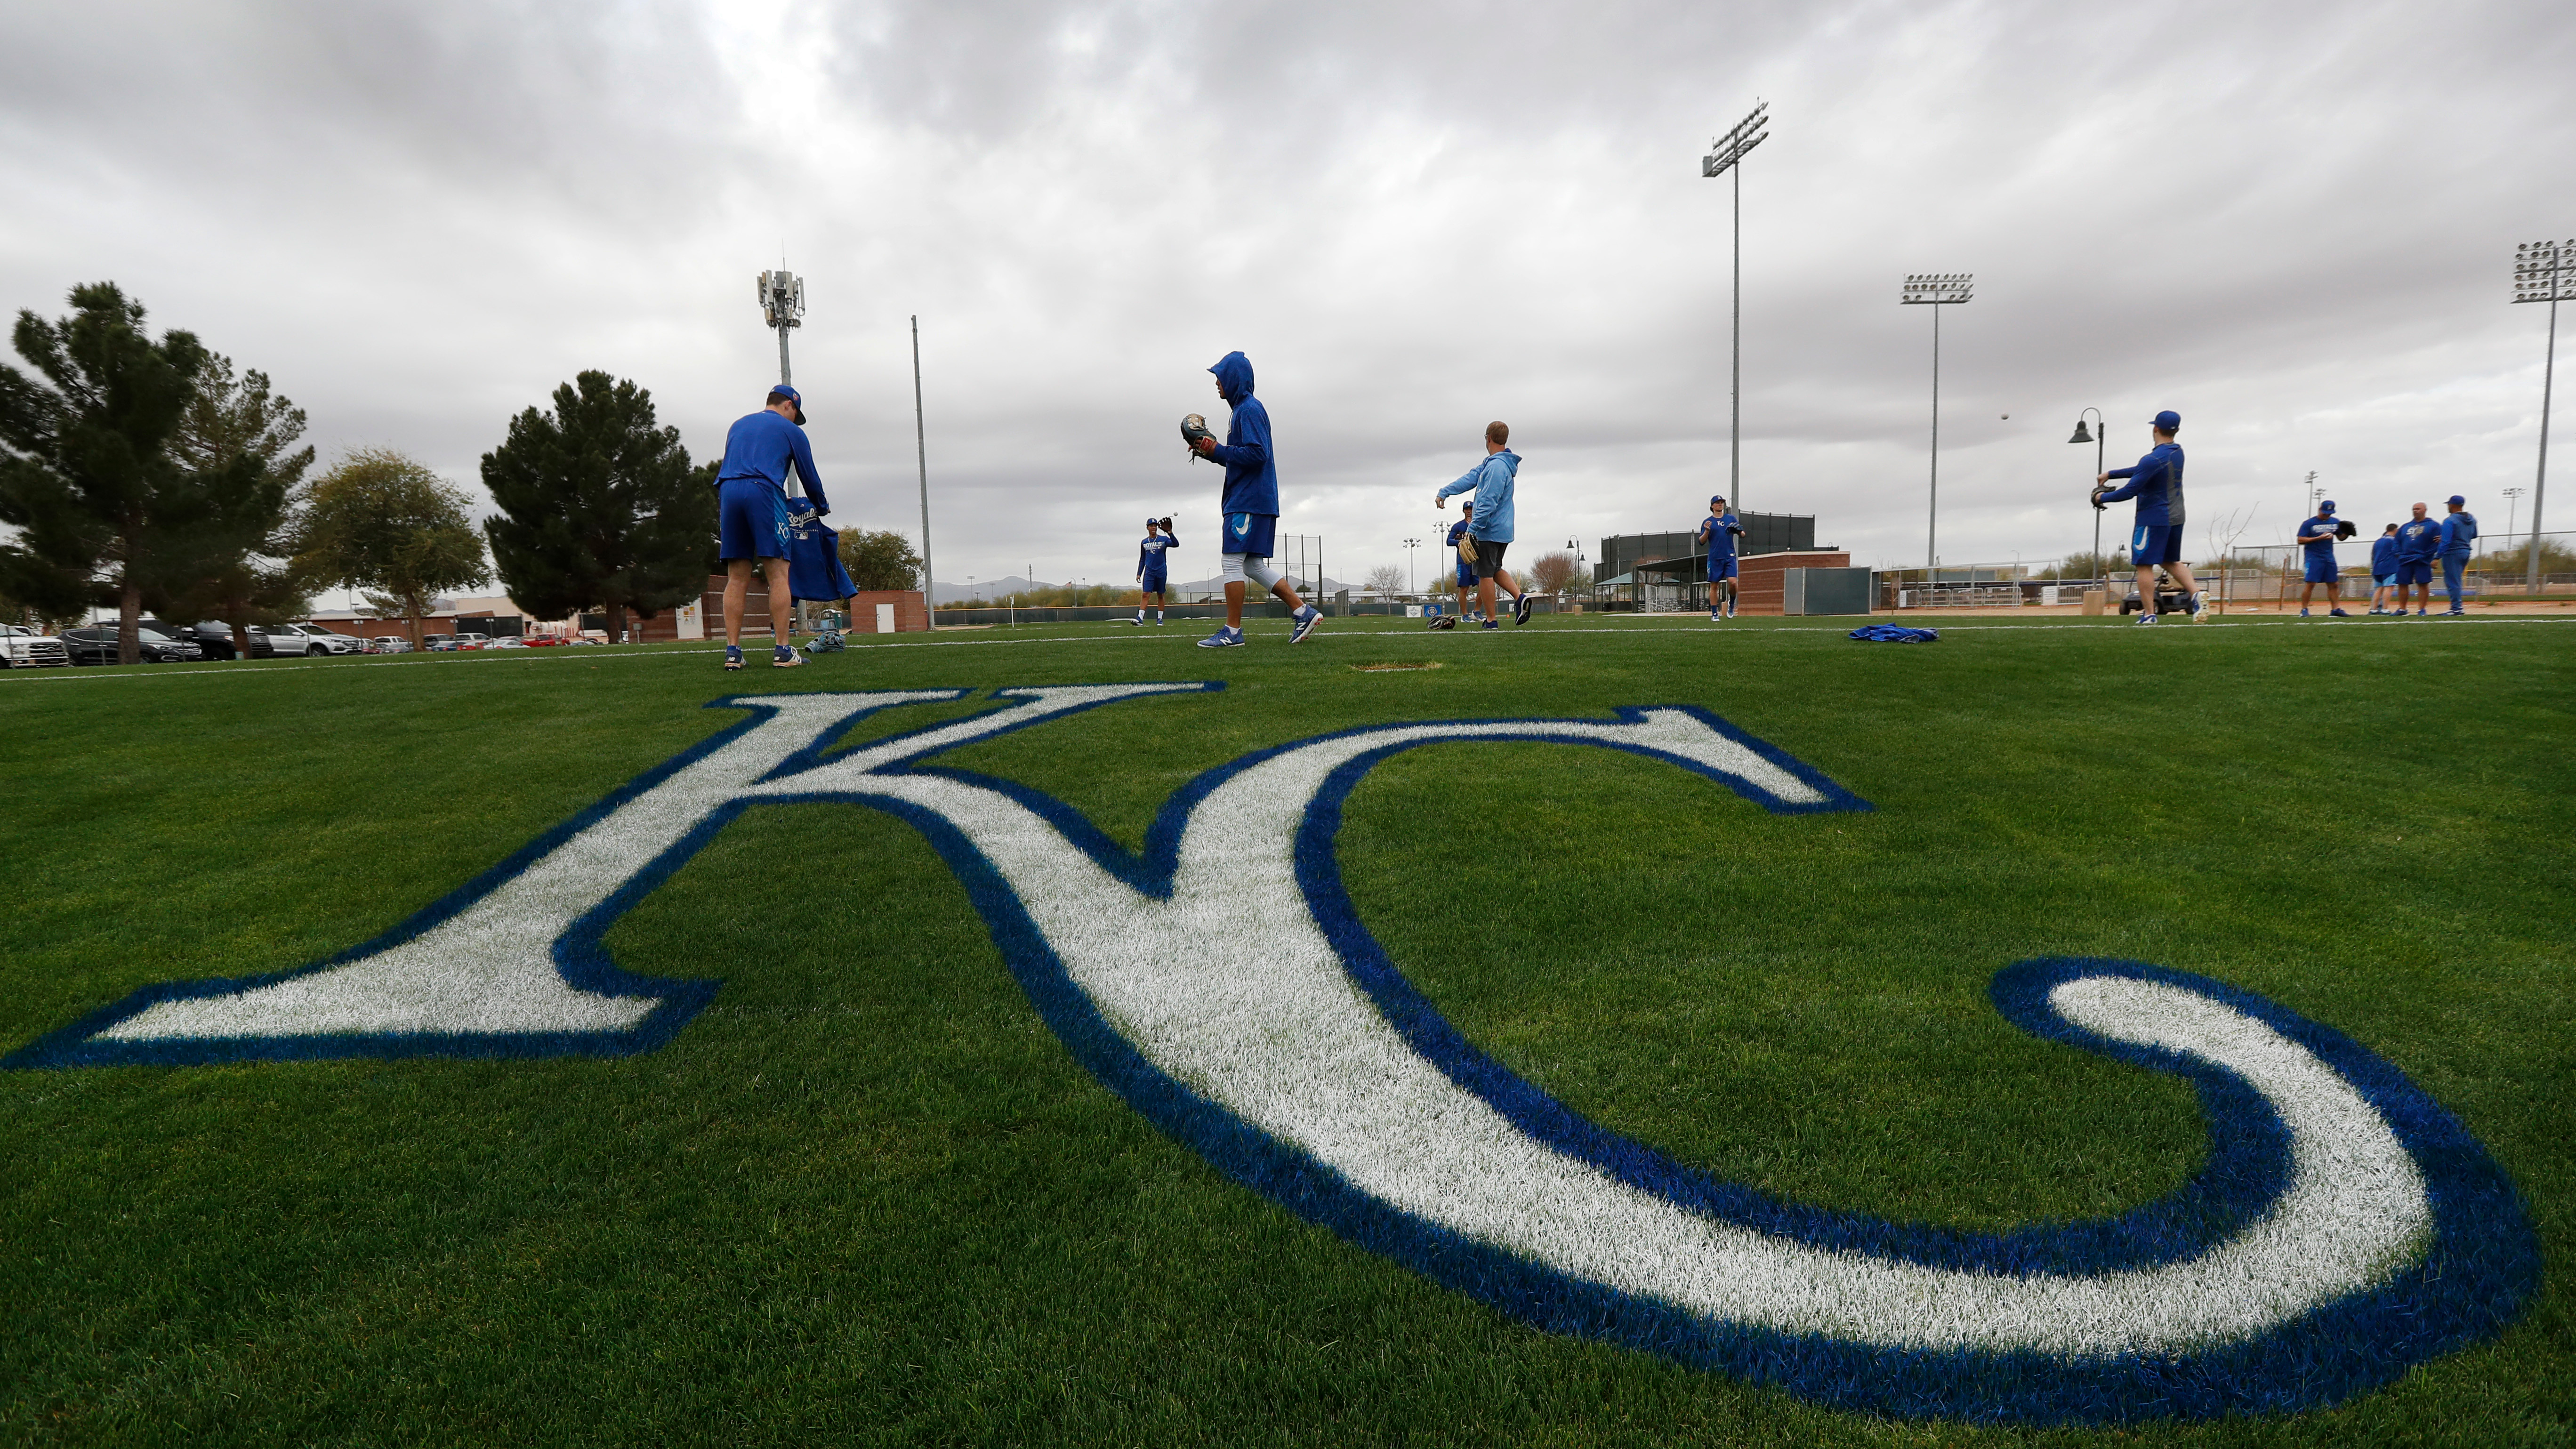 Postcards from Surprise: Royals spring training 2018